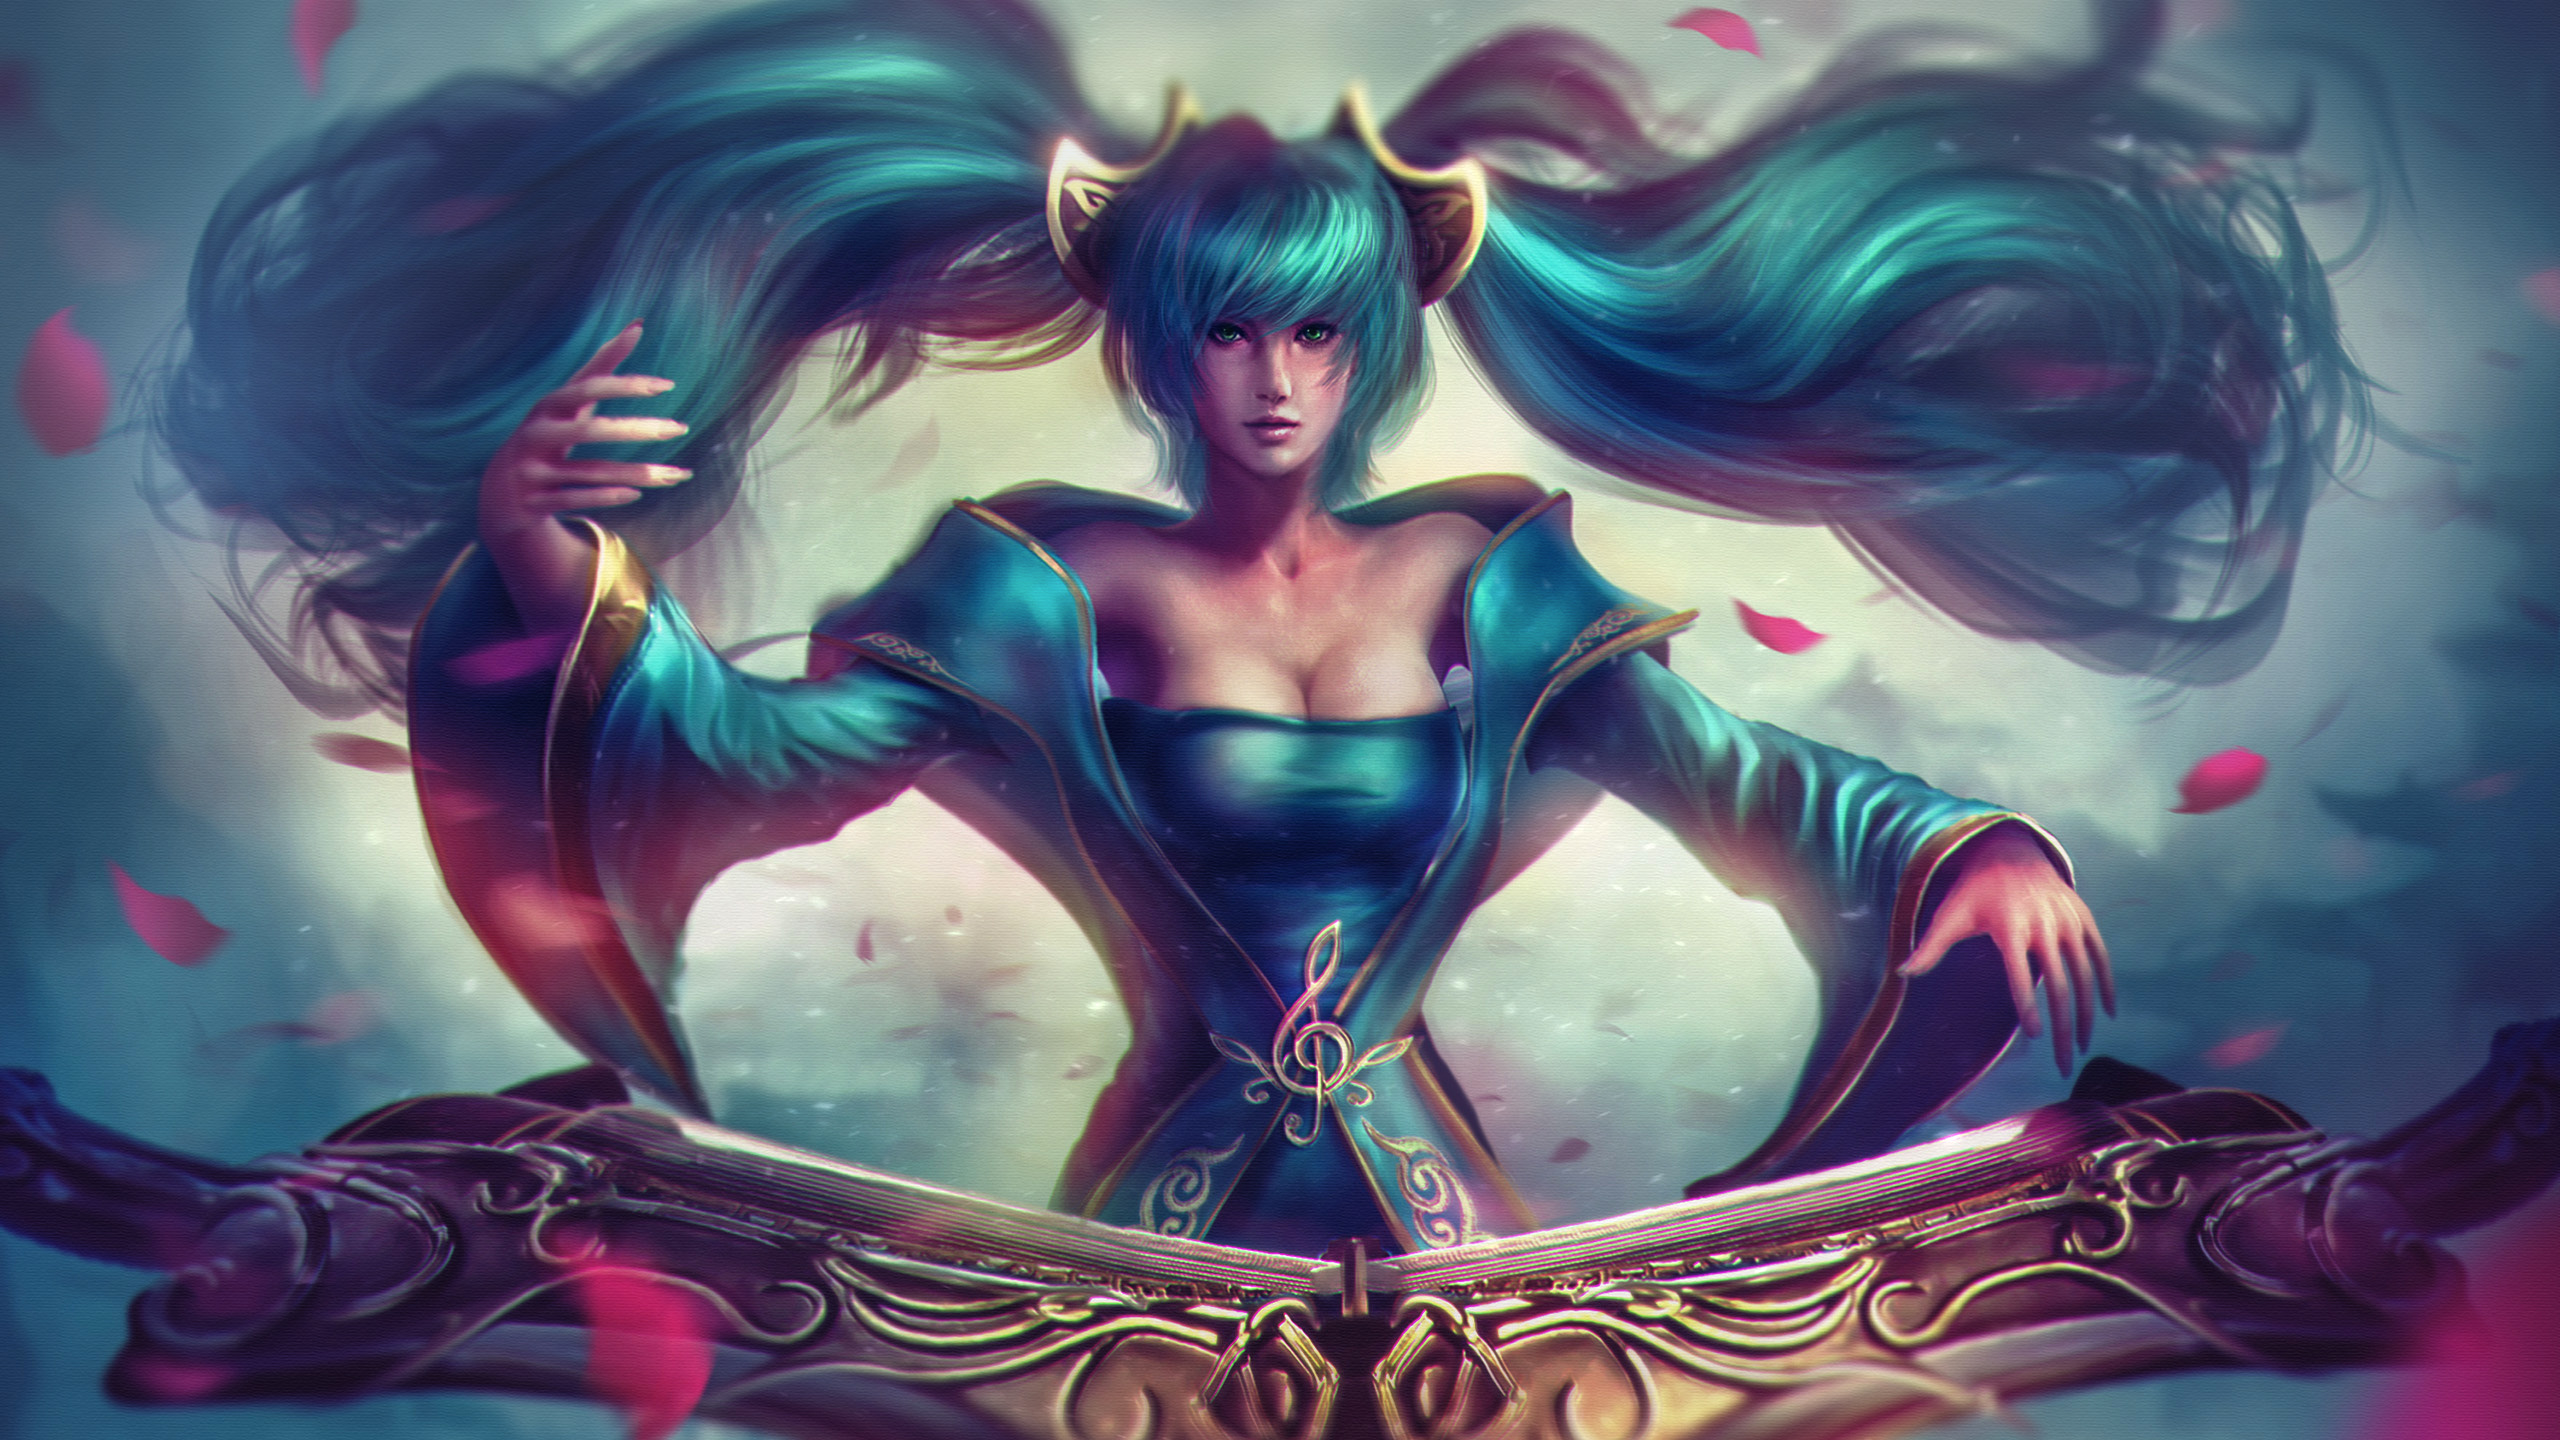 Sona from League of Legends by EDDY SHINJUKU